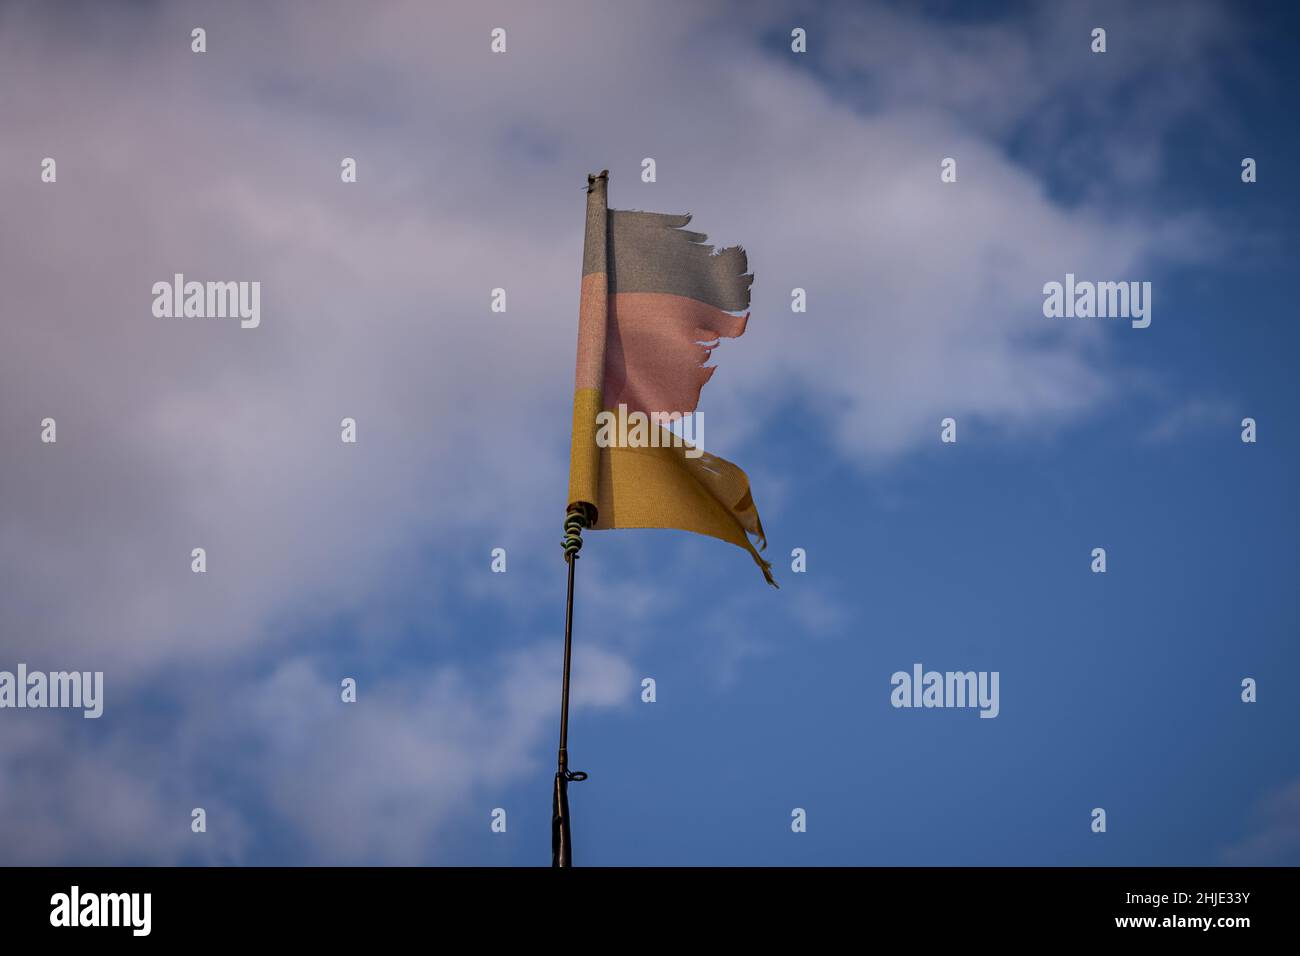 A torn German flag with clouds in the background, seen near Klein Kubitz, Mecklenburg-Western Pomerania, Germany Stock Photo